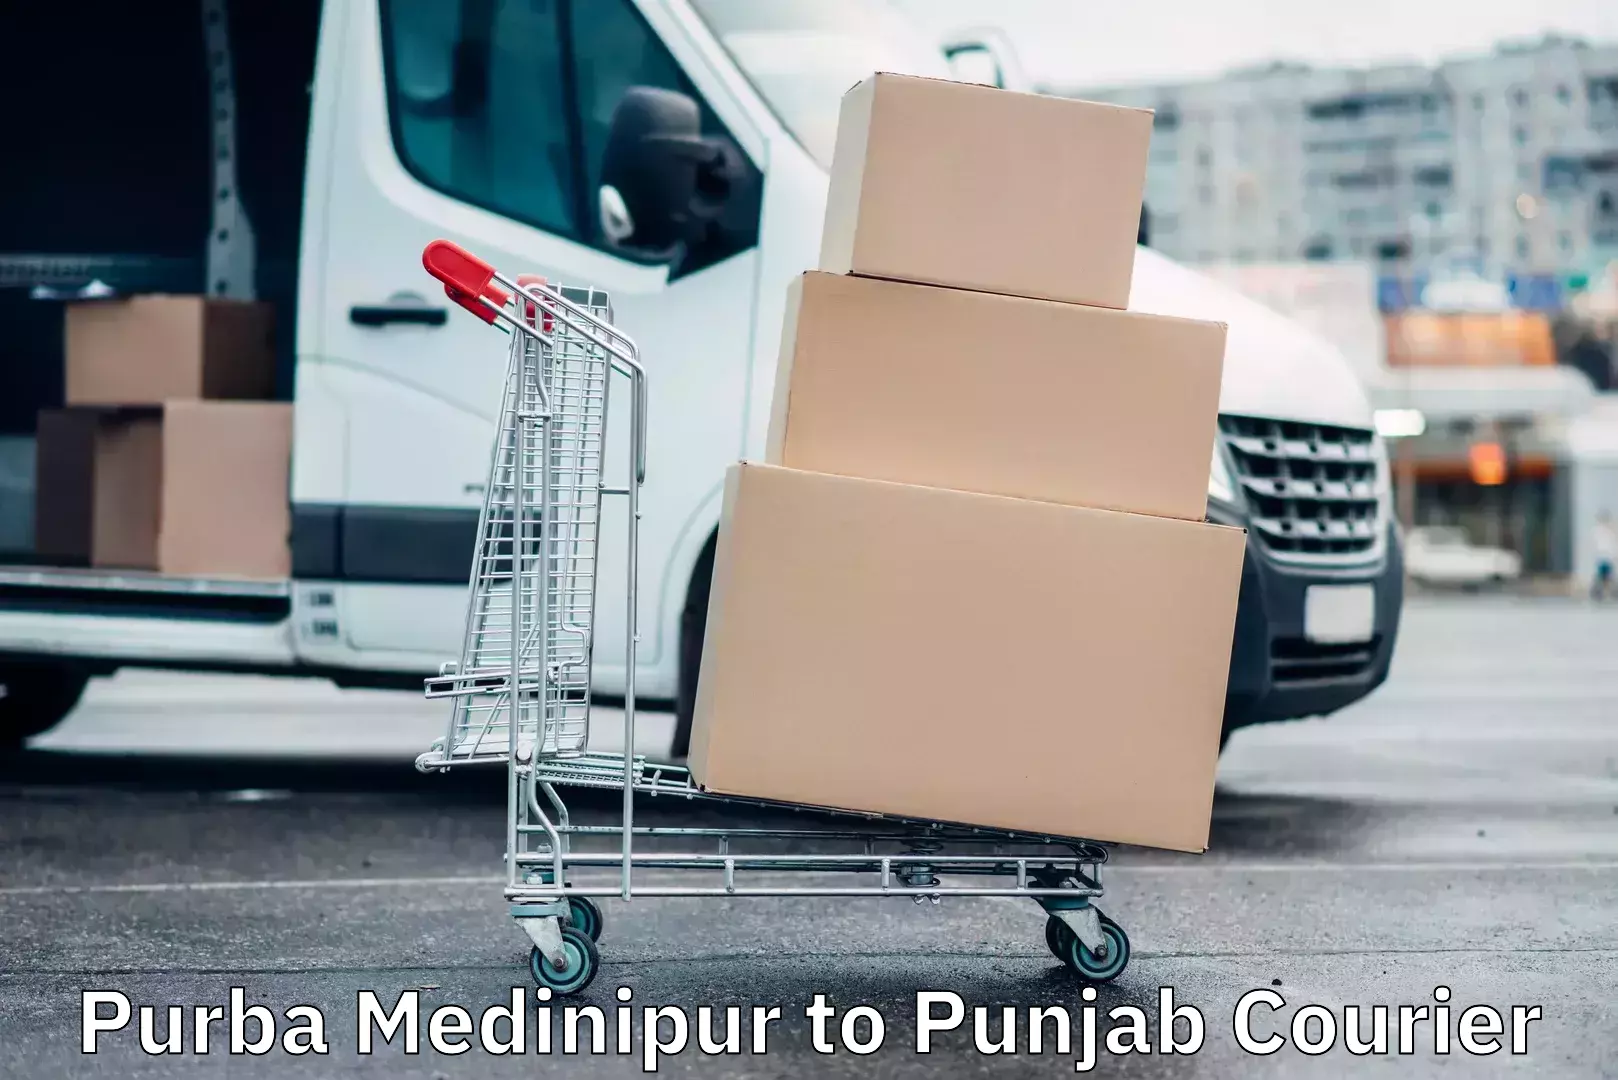 Reliable parcel services Purba Medinipur to Punjab